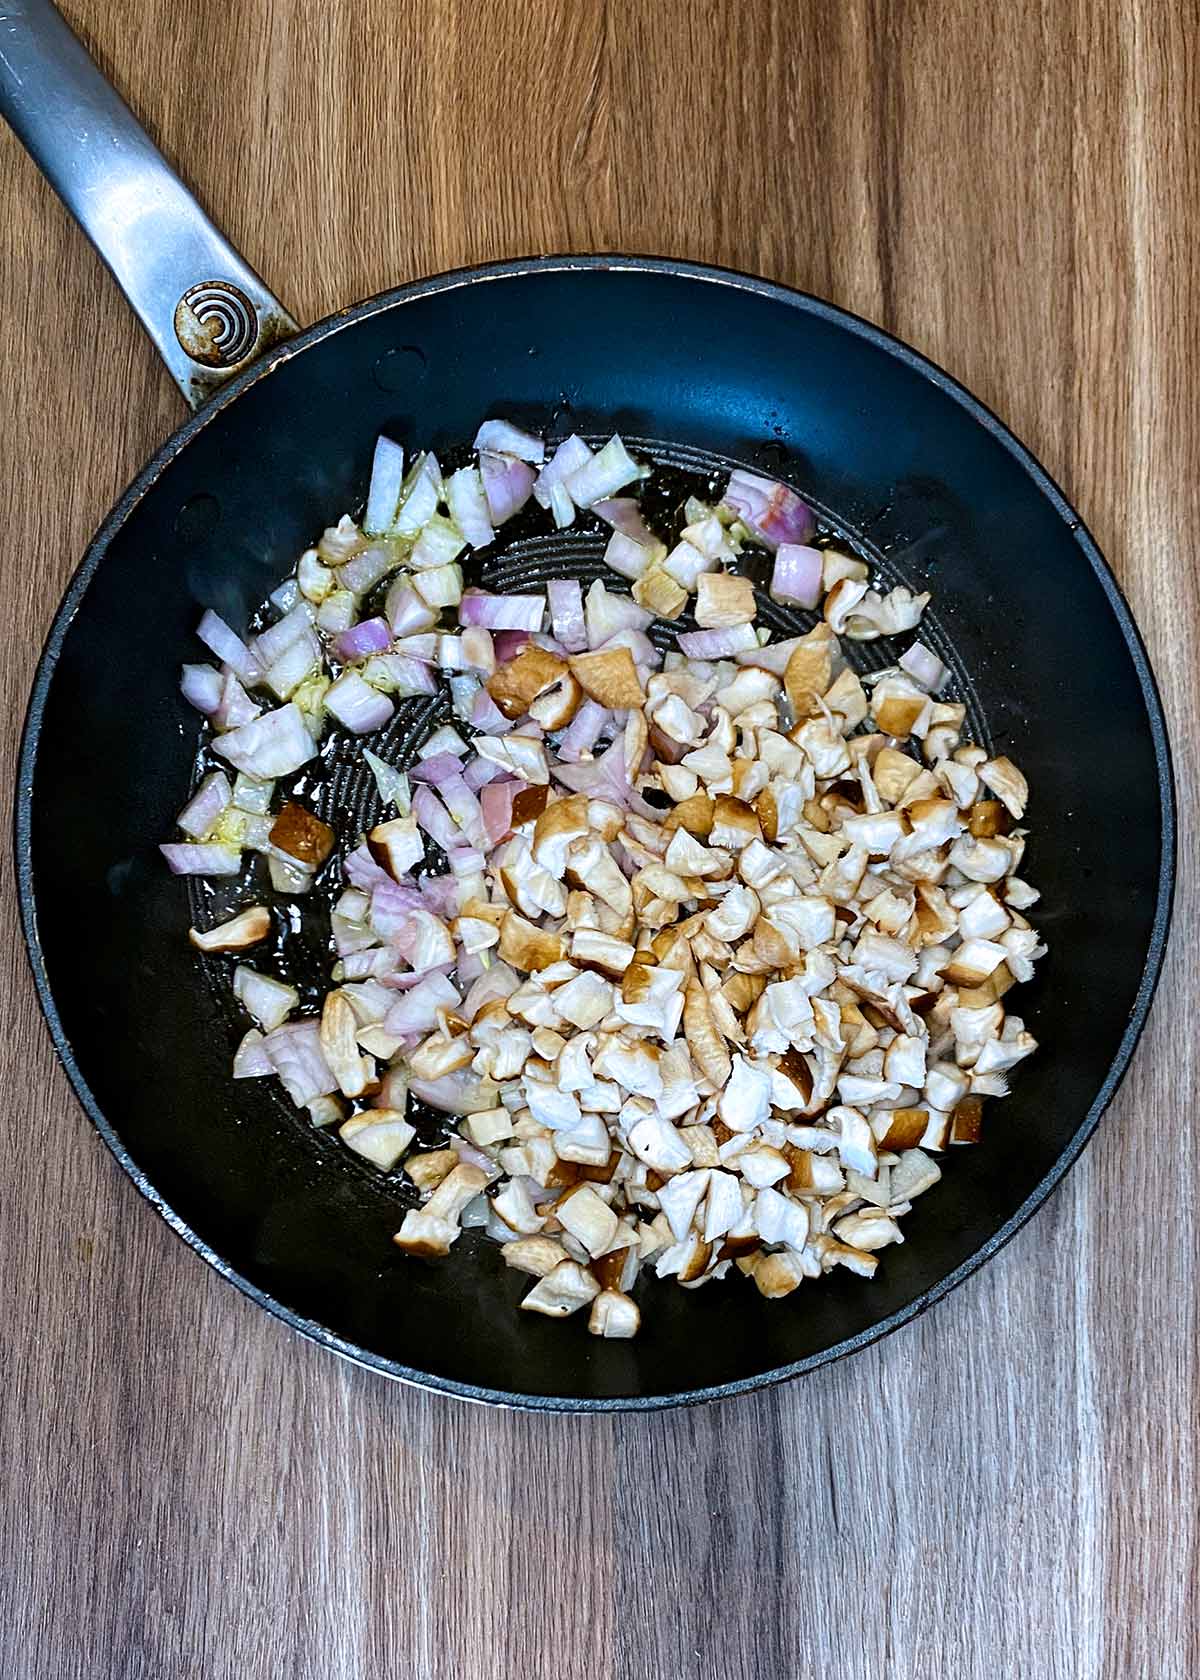 A frying pan with diced mushrooms and shallots cooking in it.